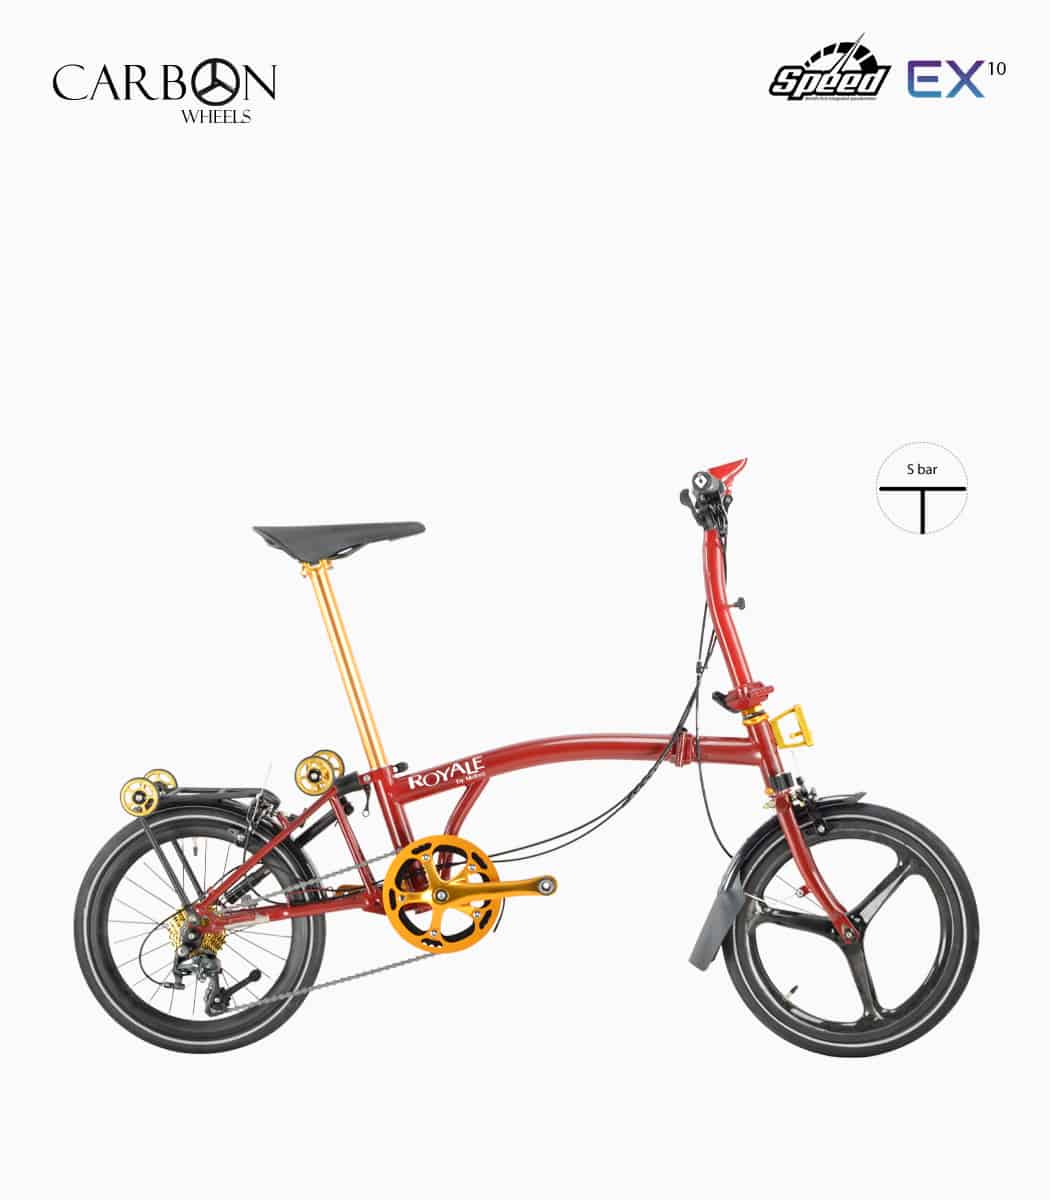 MOBOT ROYALE CARBON EX S10 (SOLAR RED) foldable bicycle speedometer edition with reflective tyres right